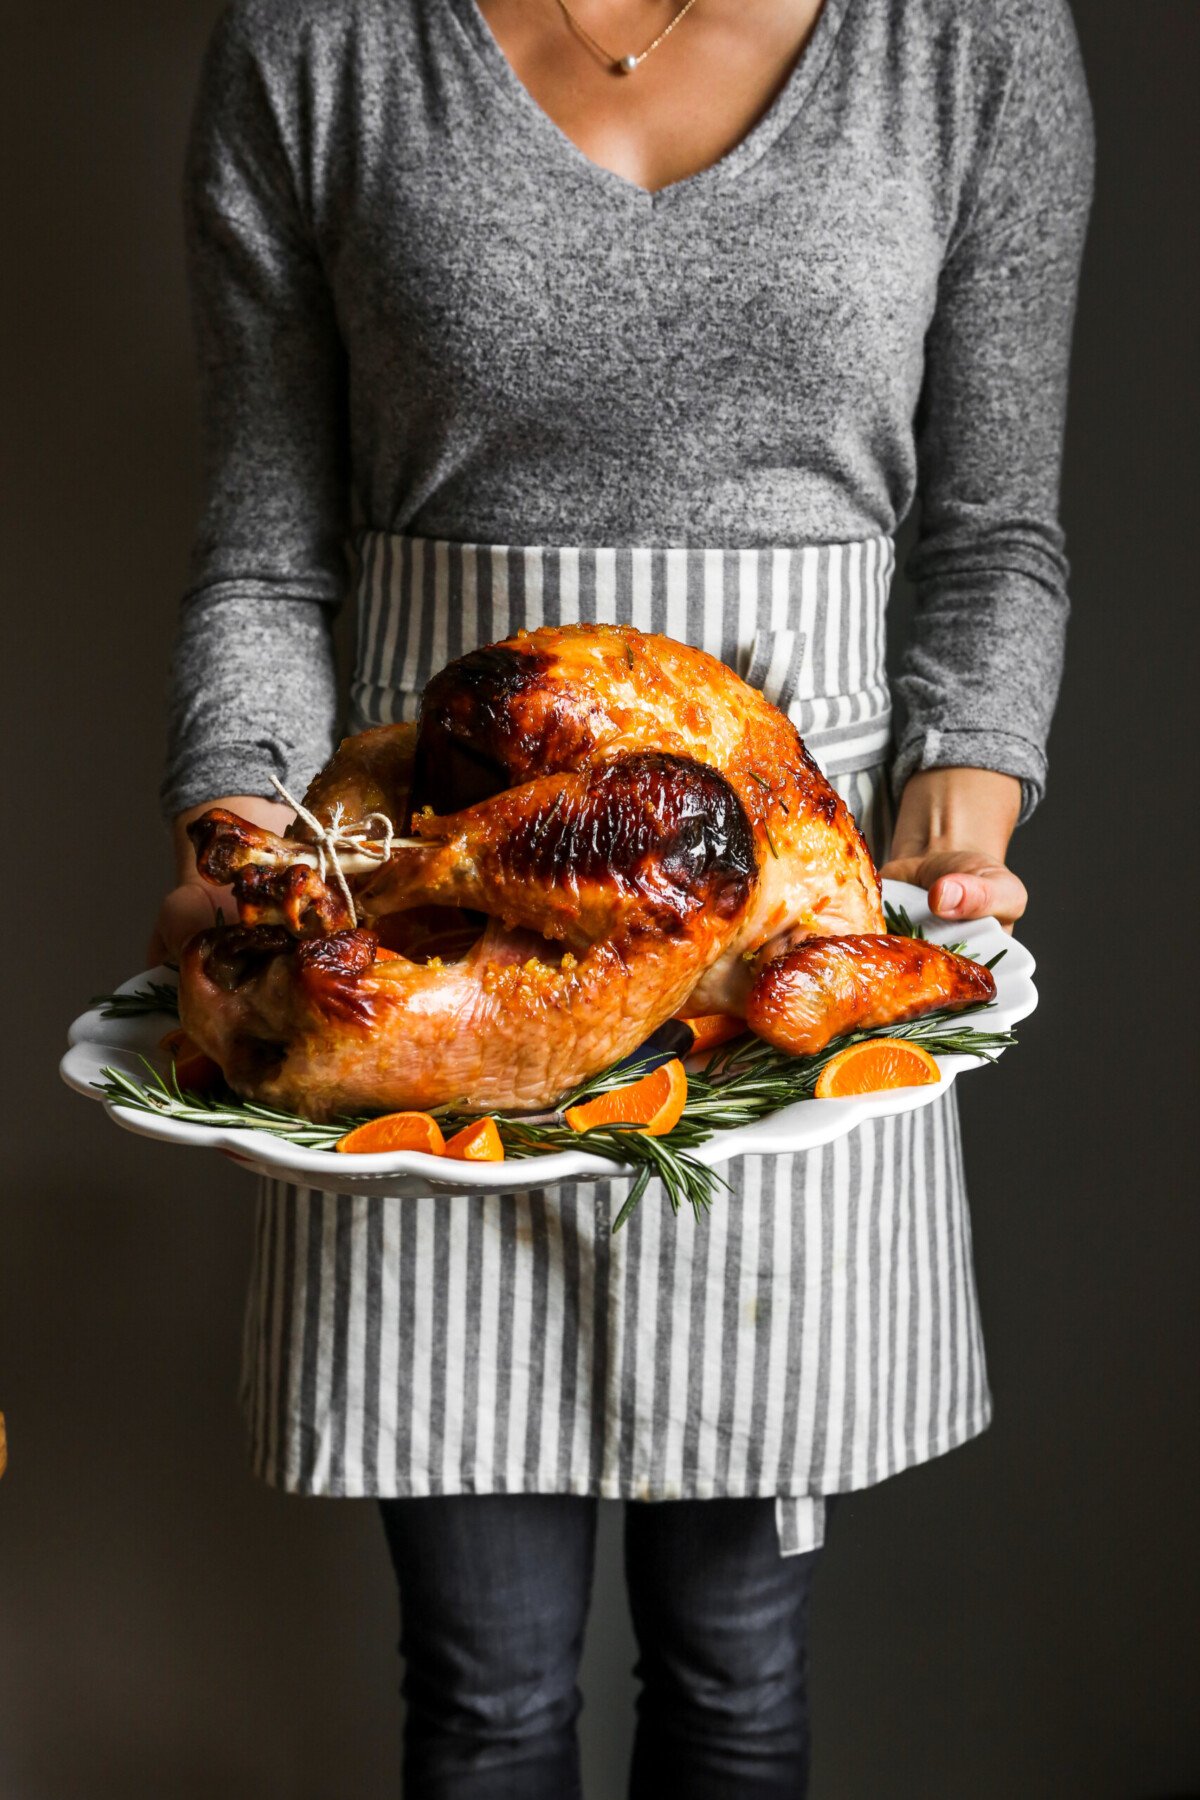 photograph of a whole glazed roast turkey on a large white platter held by someone in an apron